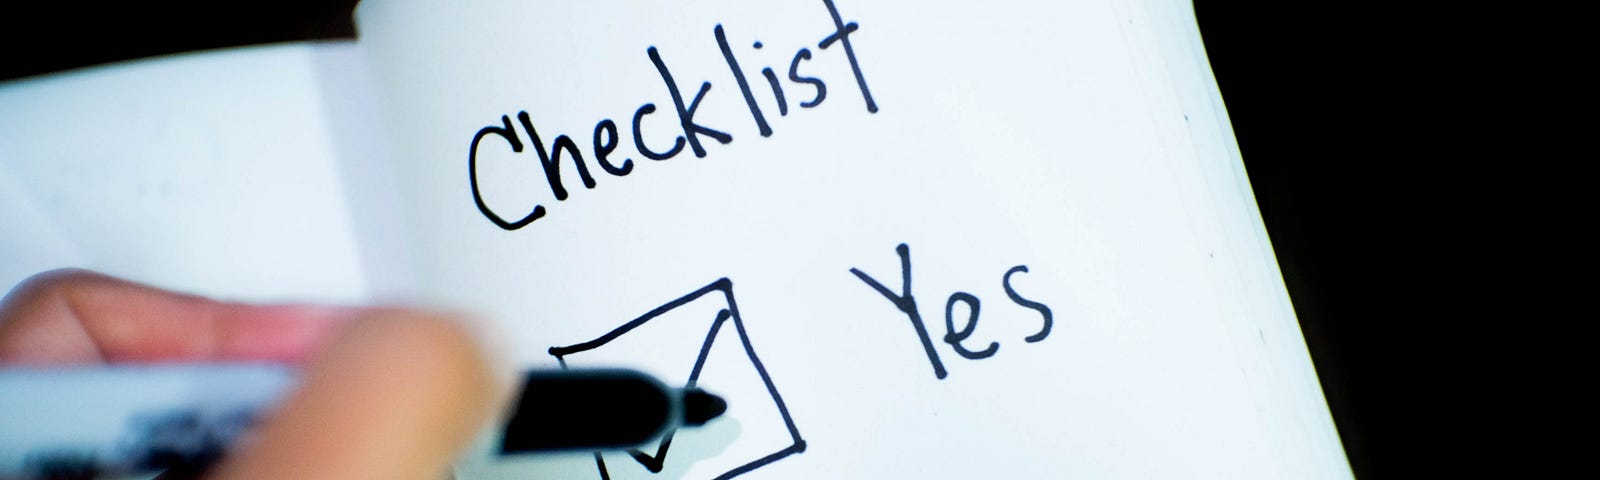 A picture of a notepad with text: checklist yes/no with checkboxes